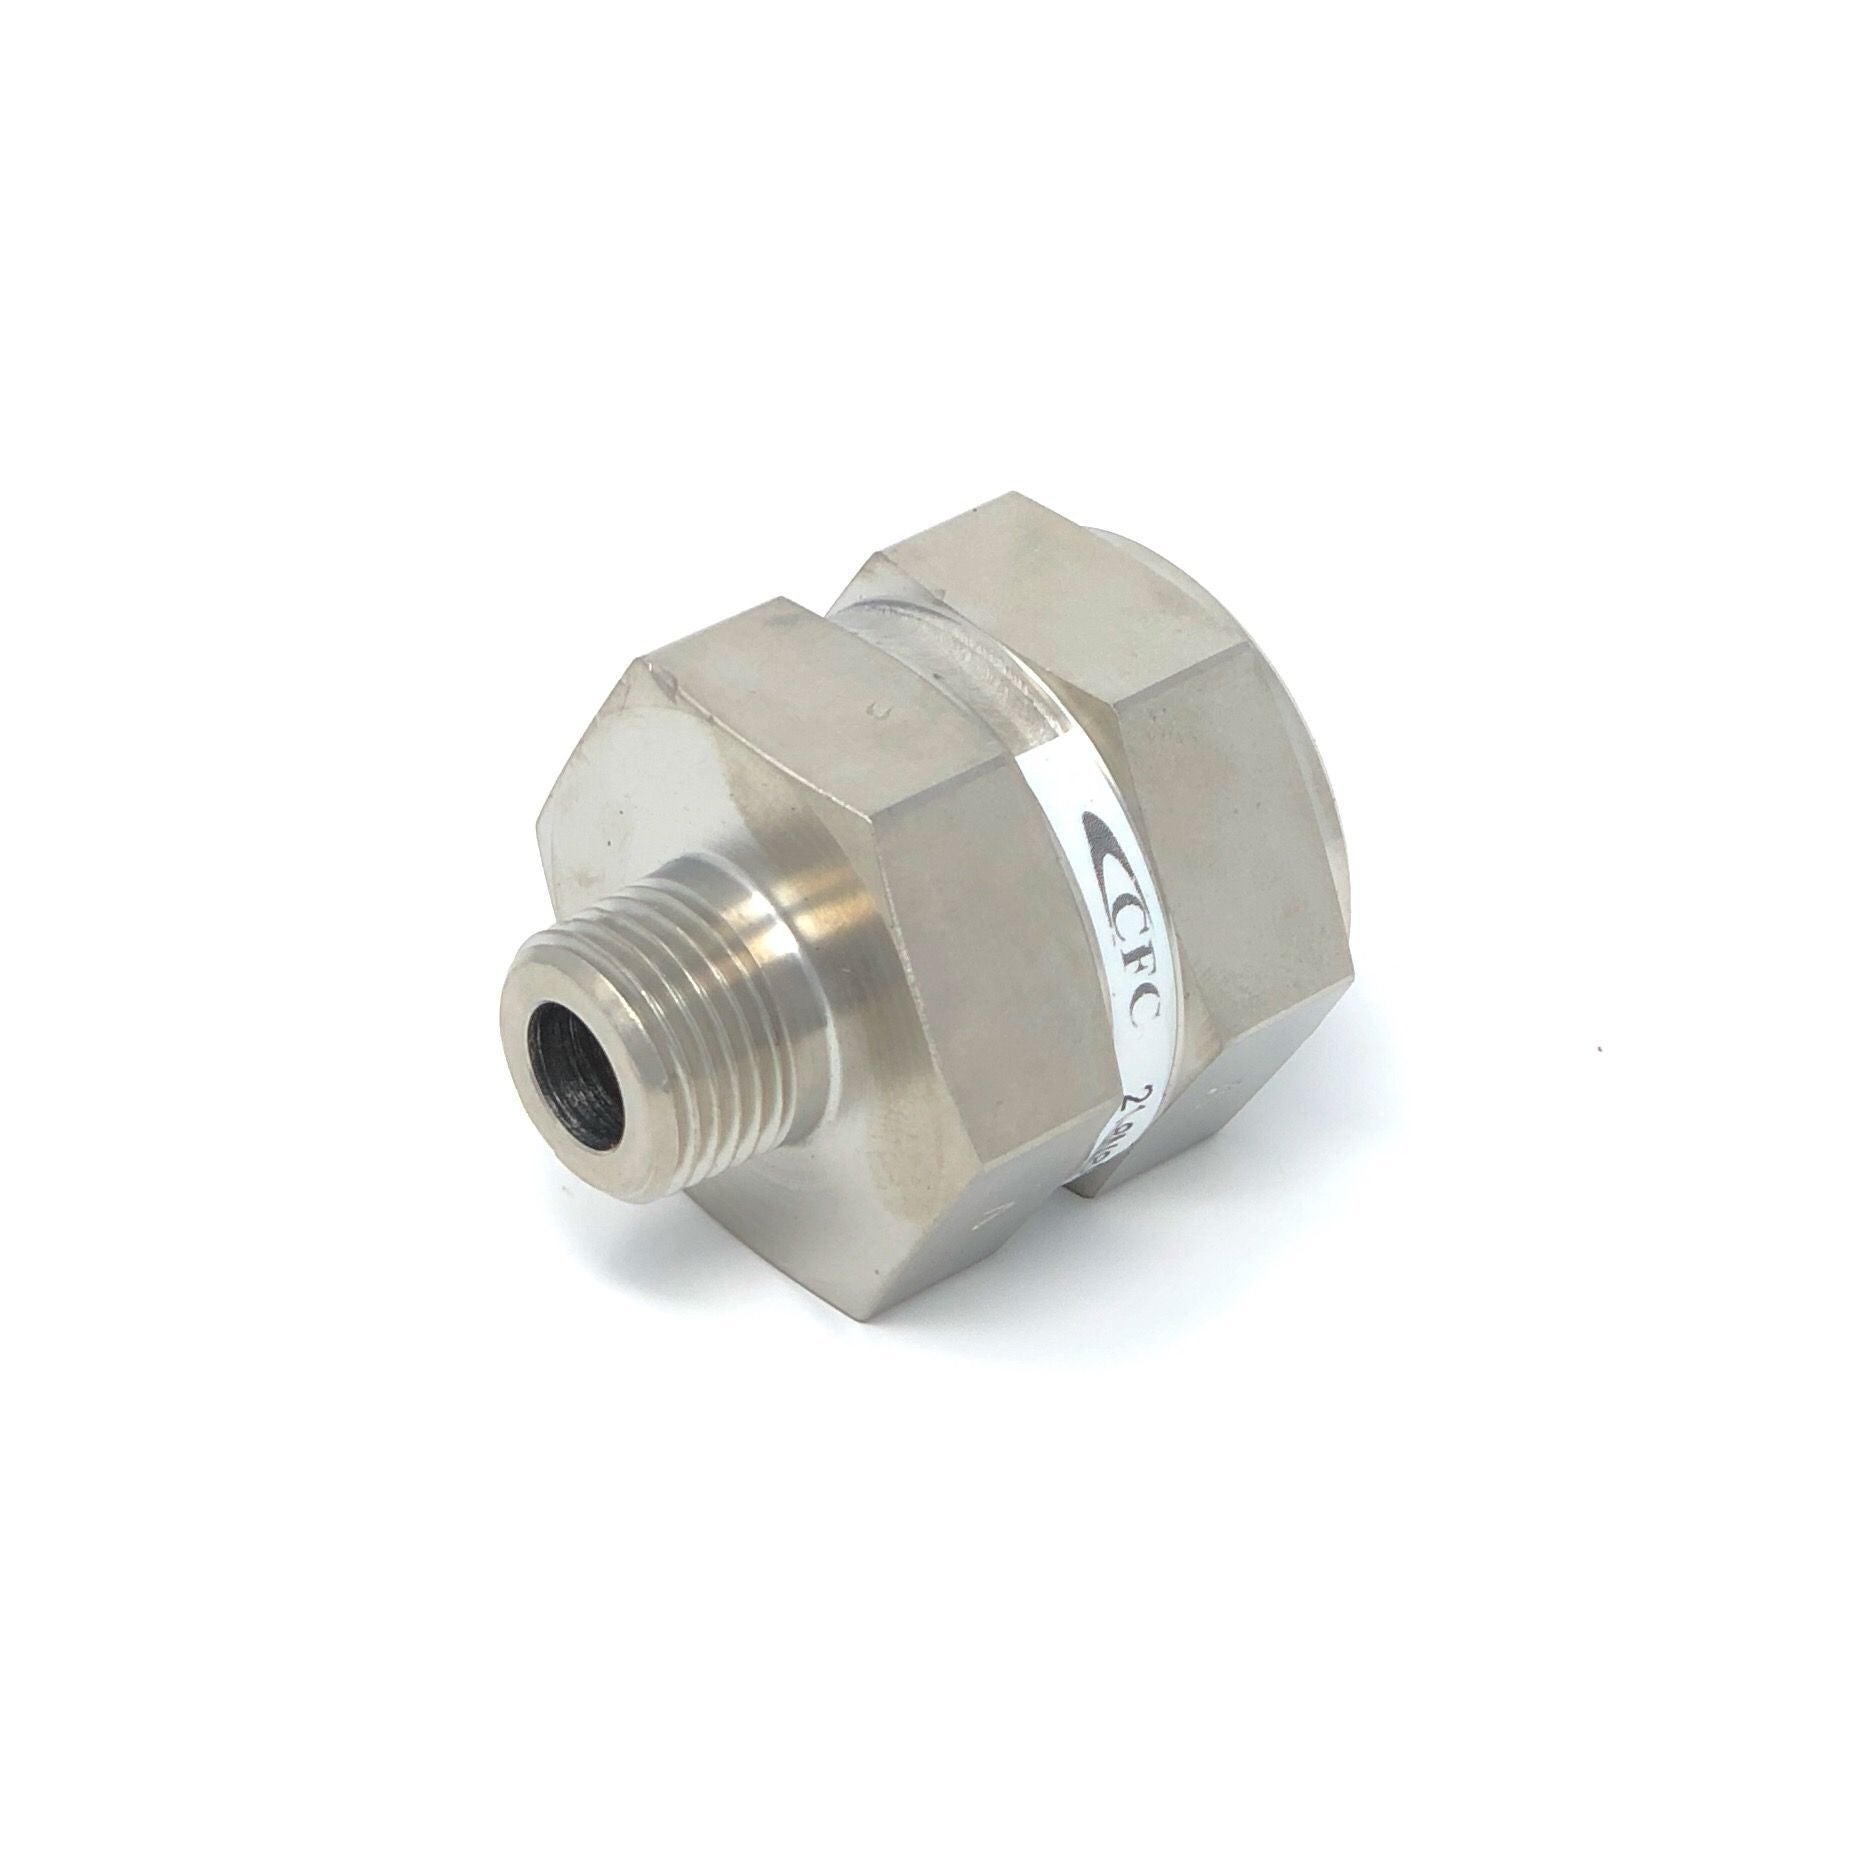 21-4M4M-25S : Chase High Pressure Inline Filter, 6000psi, #4 SAE (1/4"), 25 Micron, No Visual Indicator, No Bypass